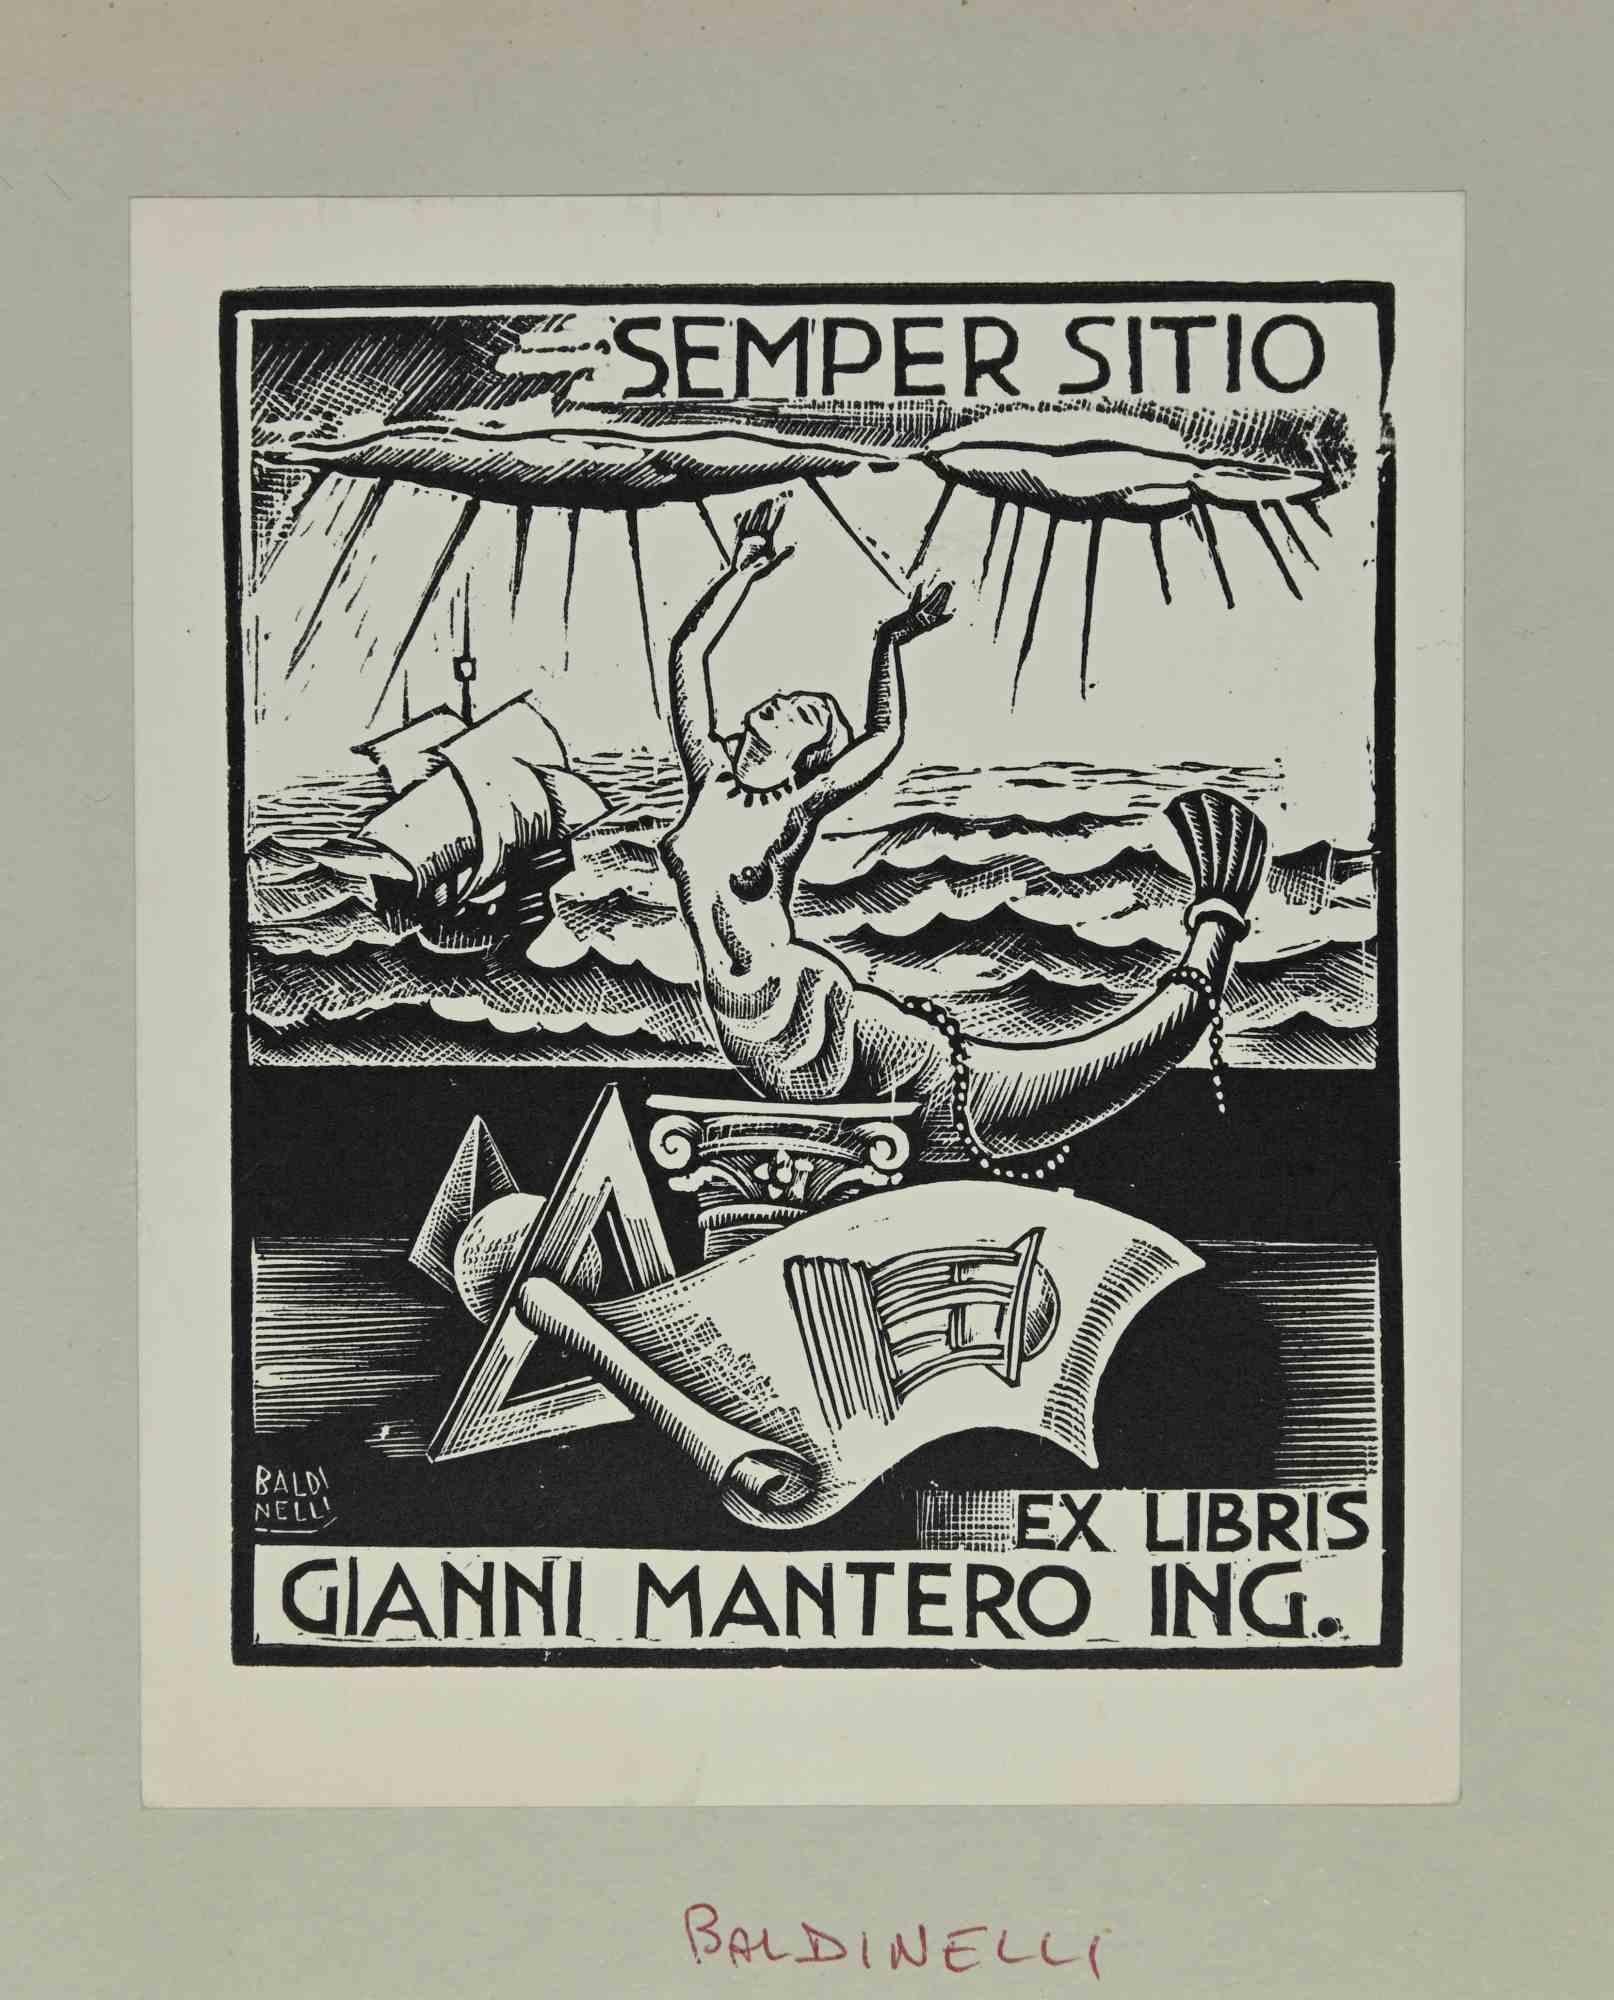 Ex Libris - Gianni Mantero Ing. is an Artwork realized in 1930 s.  by the Italian Artist Armando Baldinelli (1908-2002).

Woodcut on paper. Signed on plate on the left corner.

The work is glued on colored cardboard. Total dimensions: 19x 15